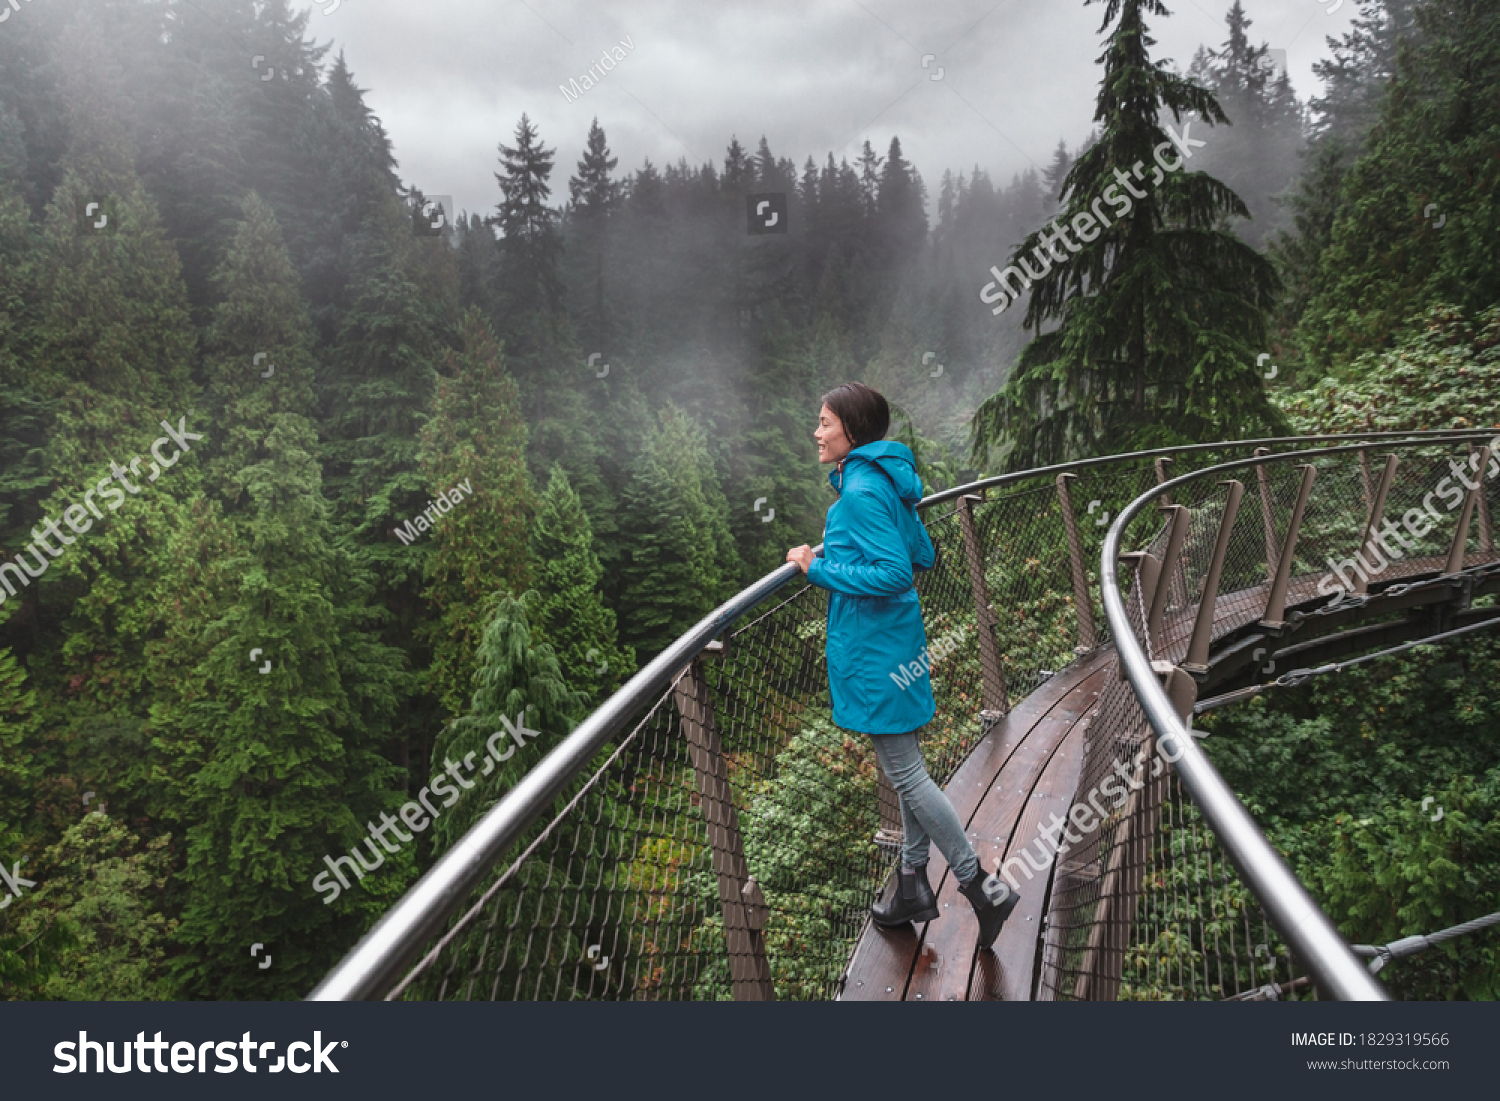 Canada Autumn travel destination in British Columbia. Asian tourist woman walking in famous attraction Capilano Suspension Bridge Park in North Vancouver, canadian vacation for tourism. #1829319566